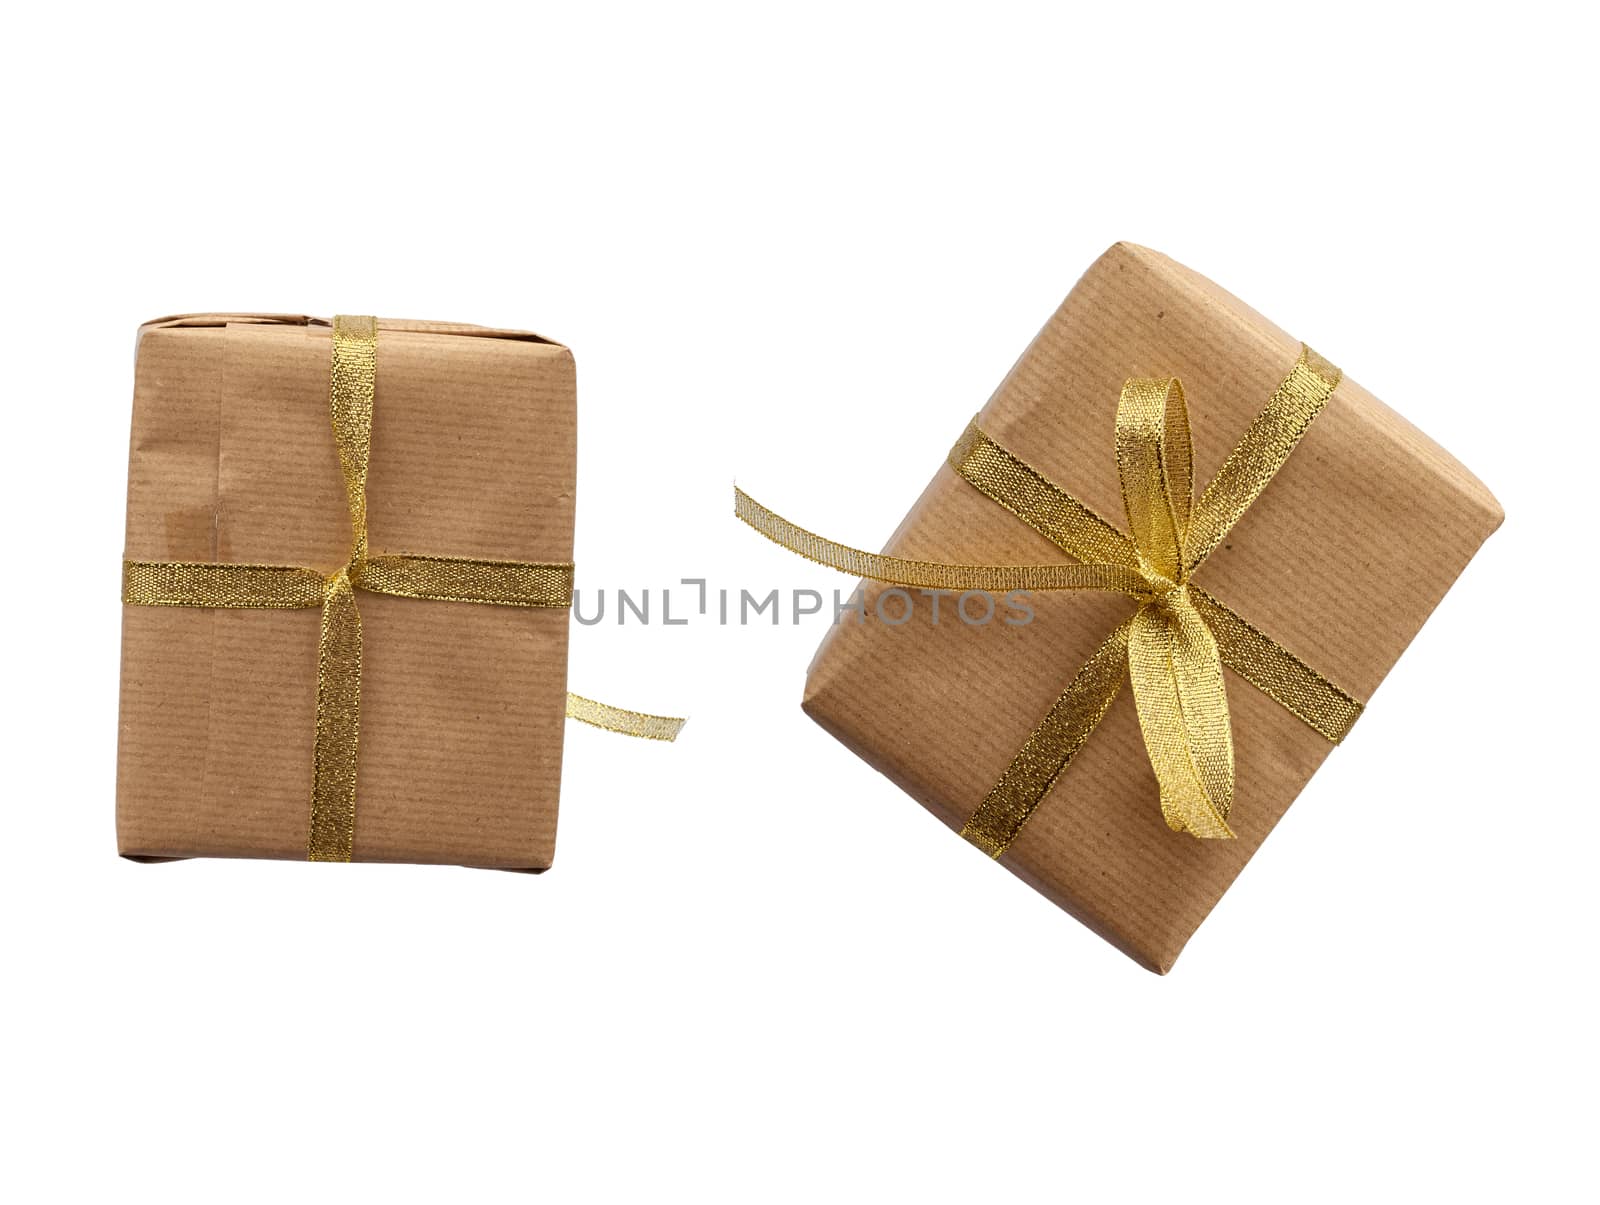 rectangular box wrapped in brown kraft paper and tied with a blu by ndanko